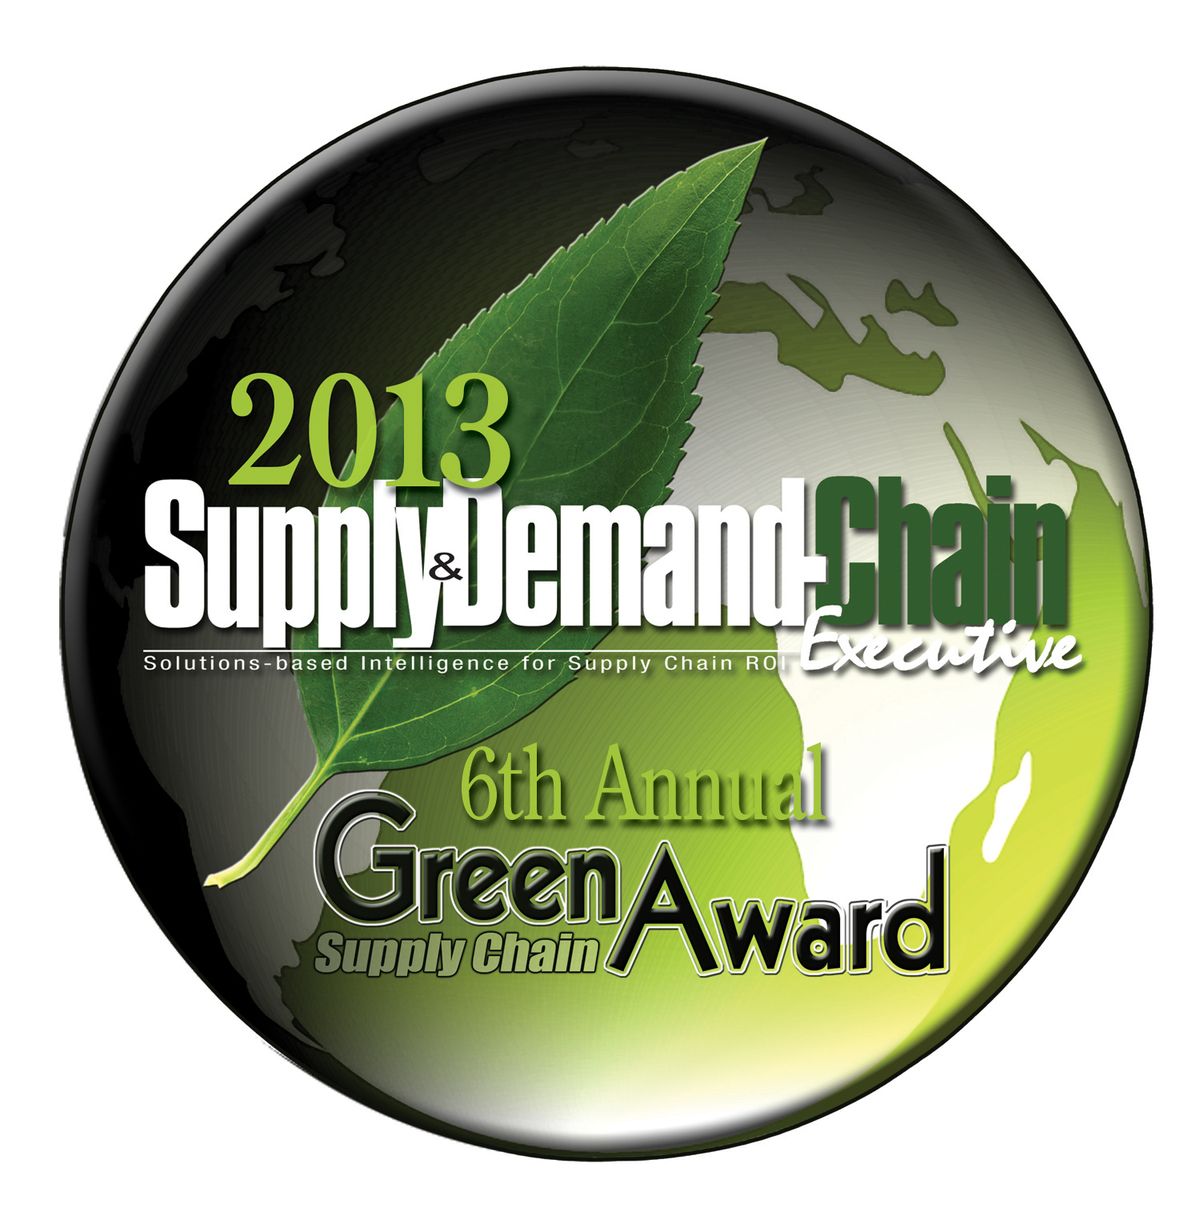 Penske Given Green Award by Supply & Demand Chain Executive